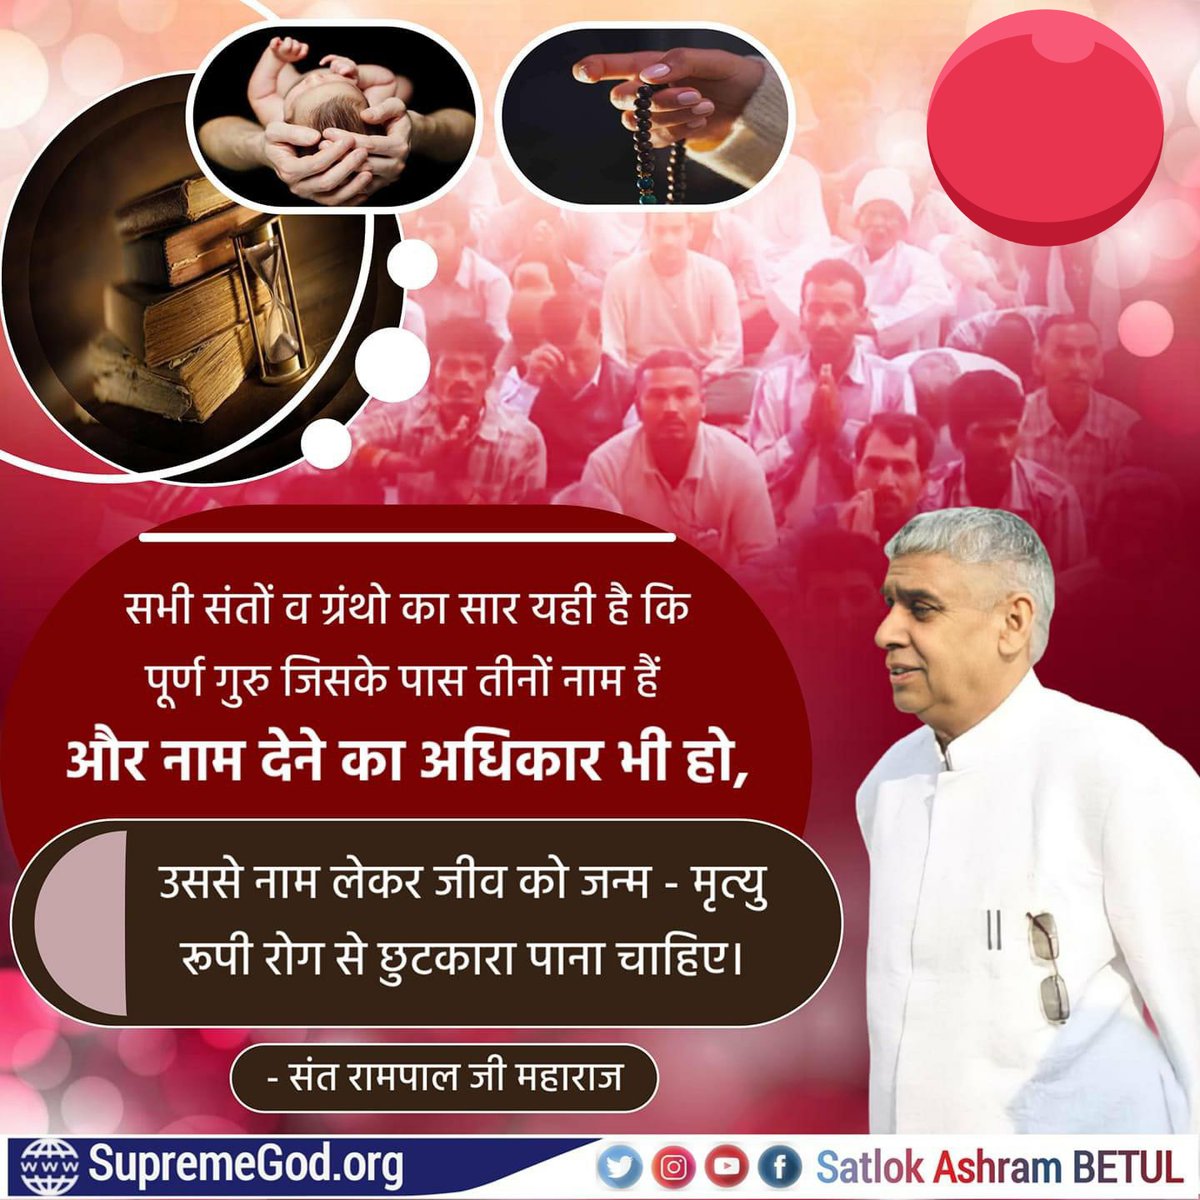 #GodmorningFriday
#FridayThoughts
The Supreme Saint describes the way to live life.
His spiritual knowledge is proven from all religious scriptures.

- @SaintRampalJiM